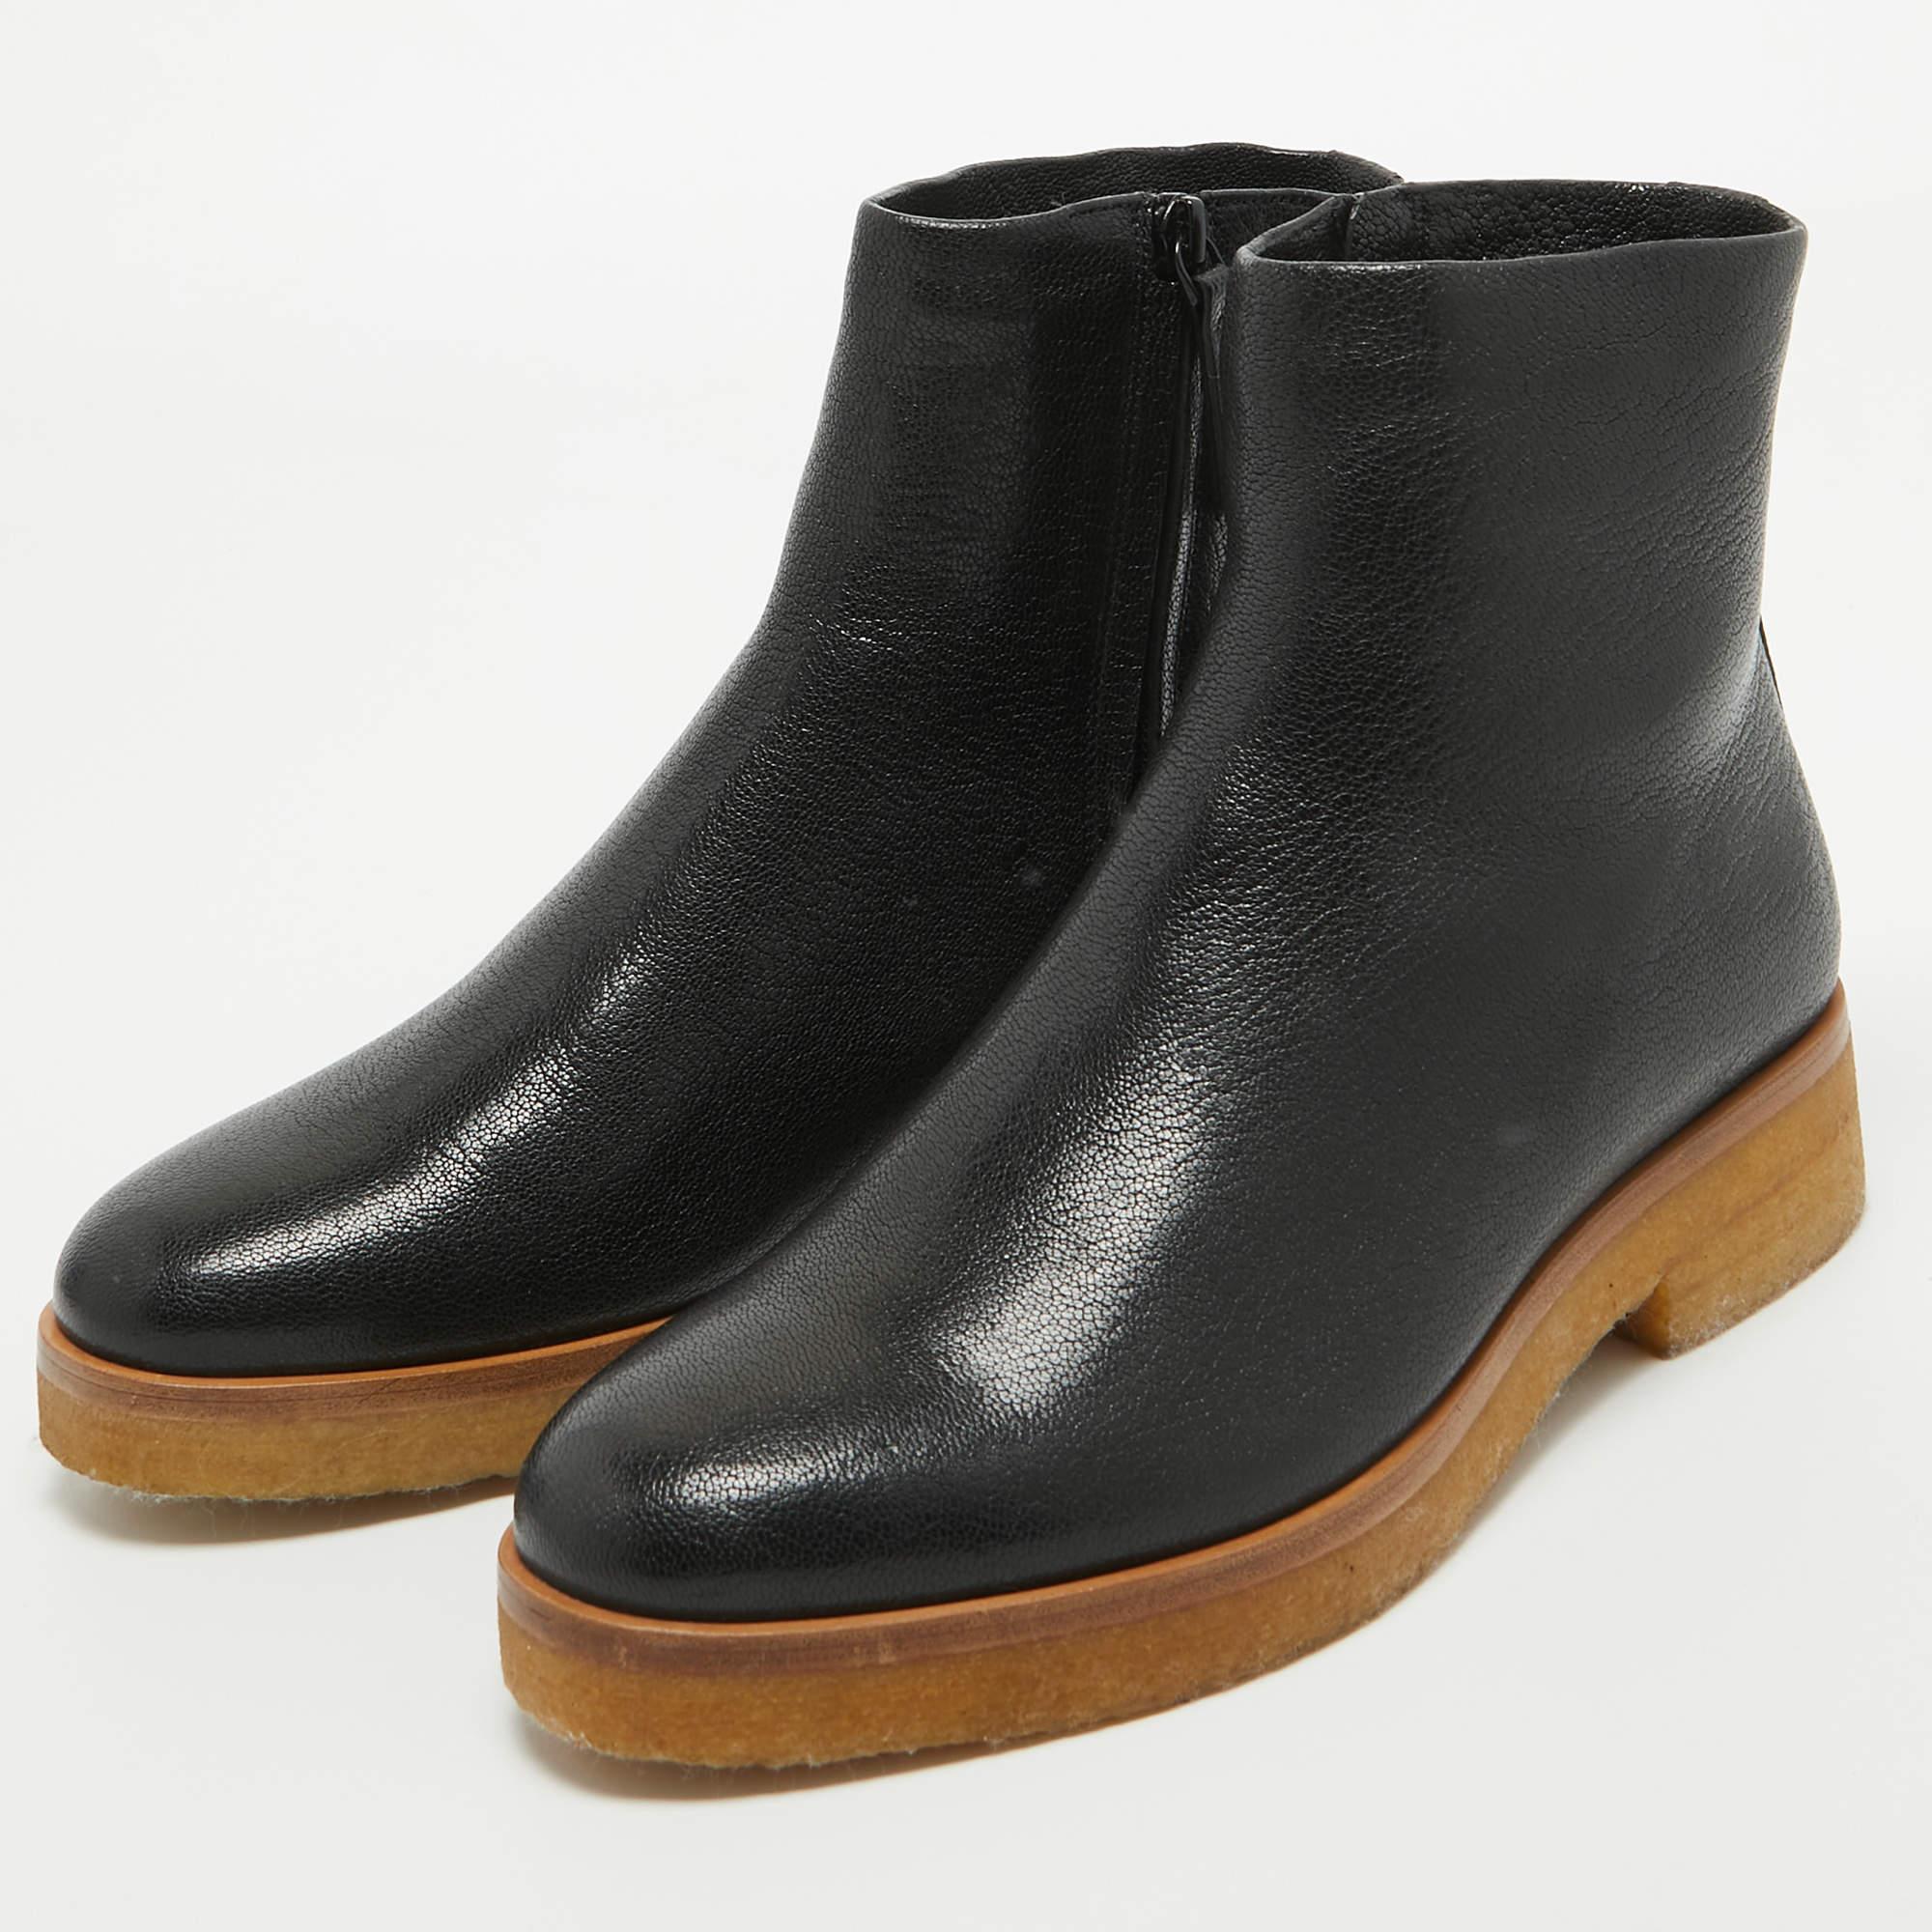 Step into sophistication with The Row's Boris ankle boots. Crafted with exquisite attention to detail, these boots exude timeless elegance. Luxurious black leather envelops the foot, while a sturdy sole provides both comfort and durability. Elevate